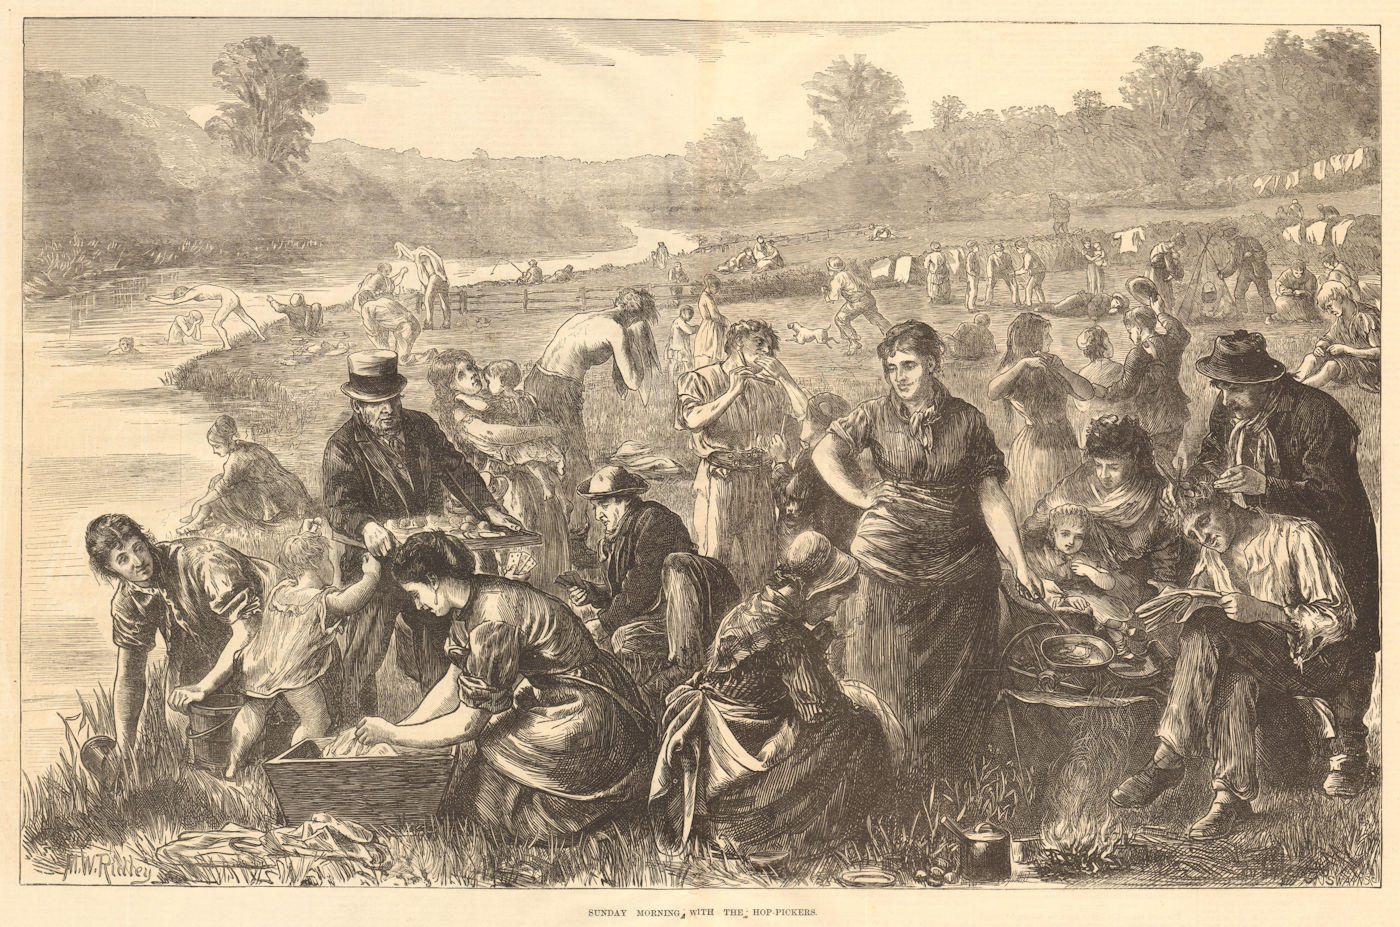 Associate Product Sunday morning with the hop-pickers. Farming 1871 antique ILN full page print